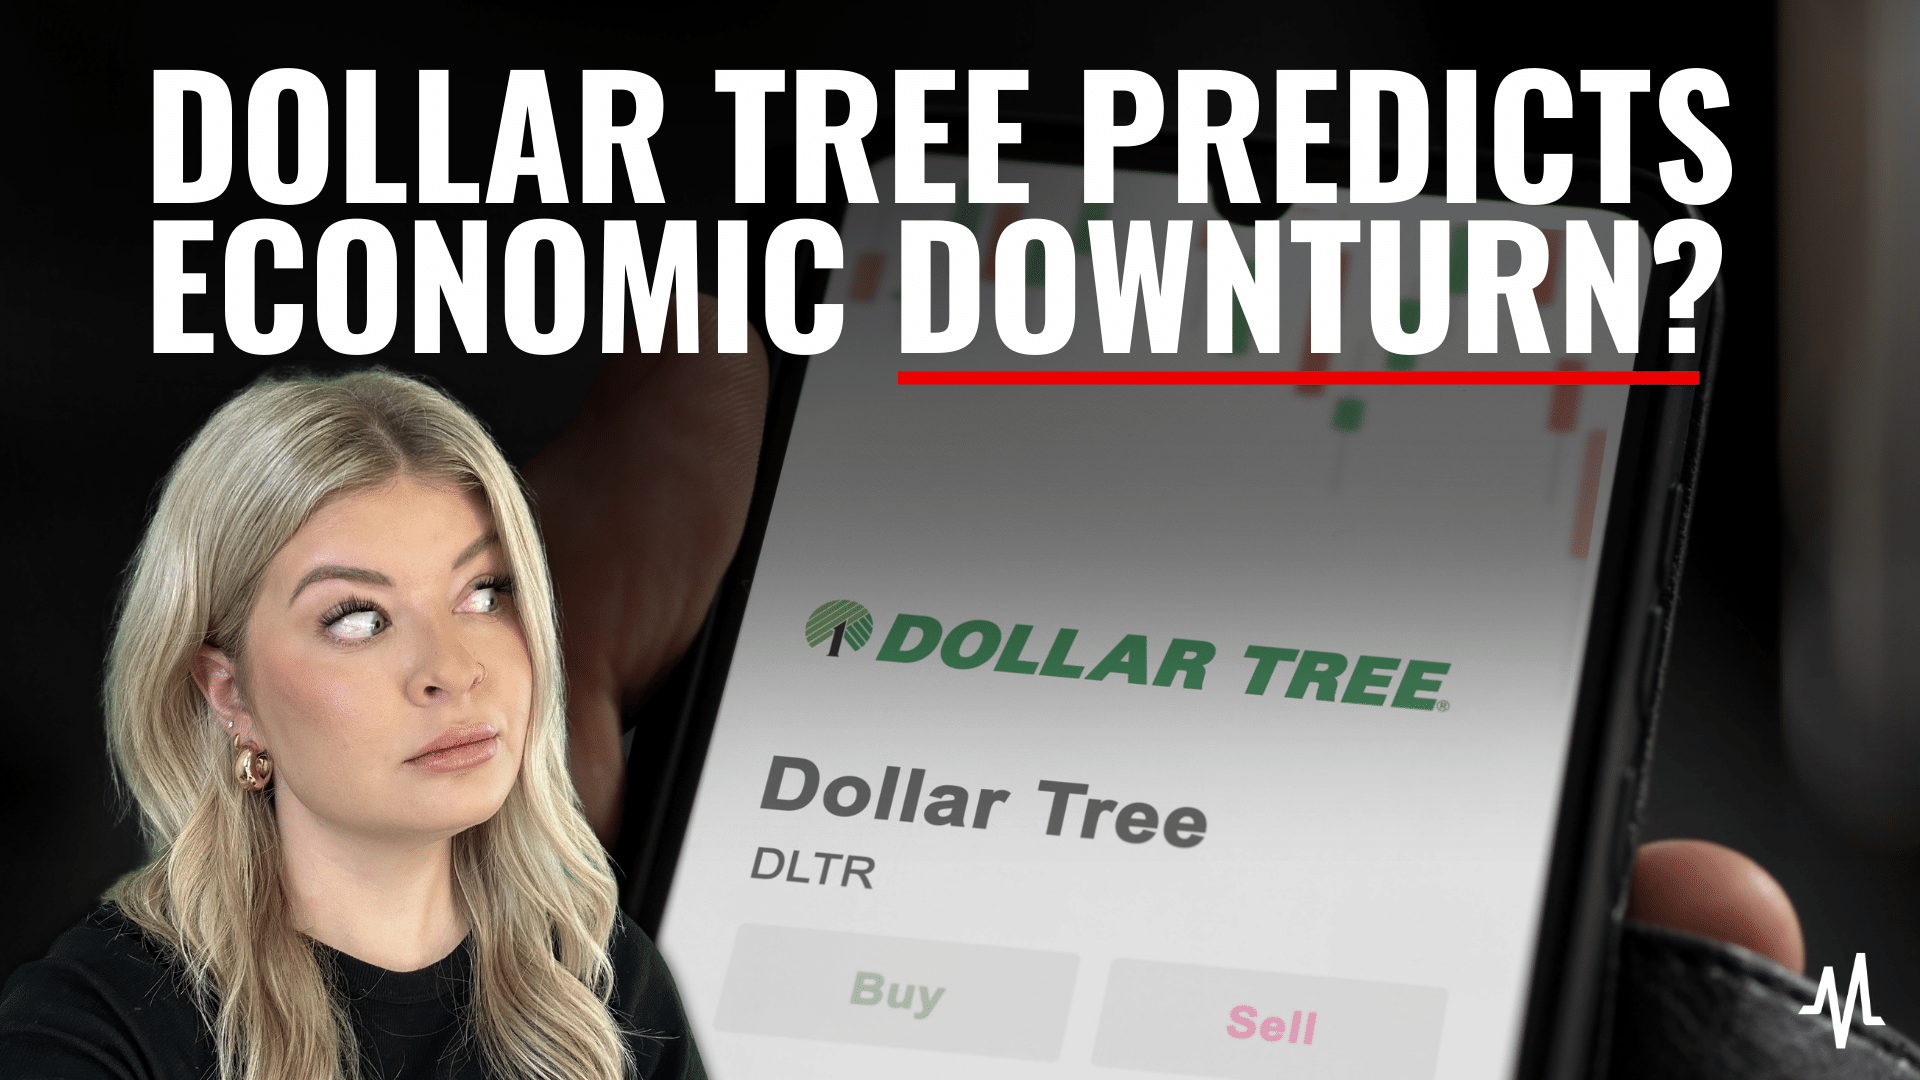 Dollar Tree Stock Plunge, What It Says About the Economy